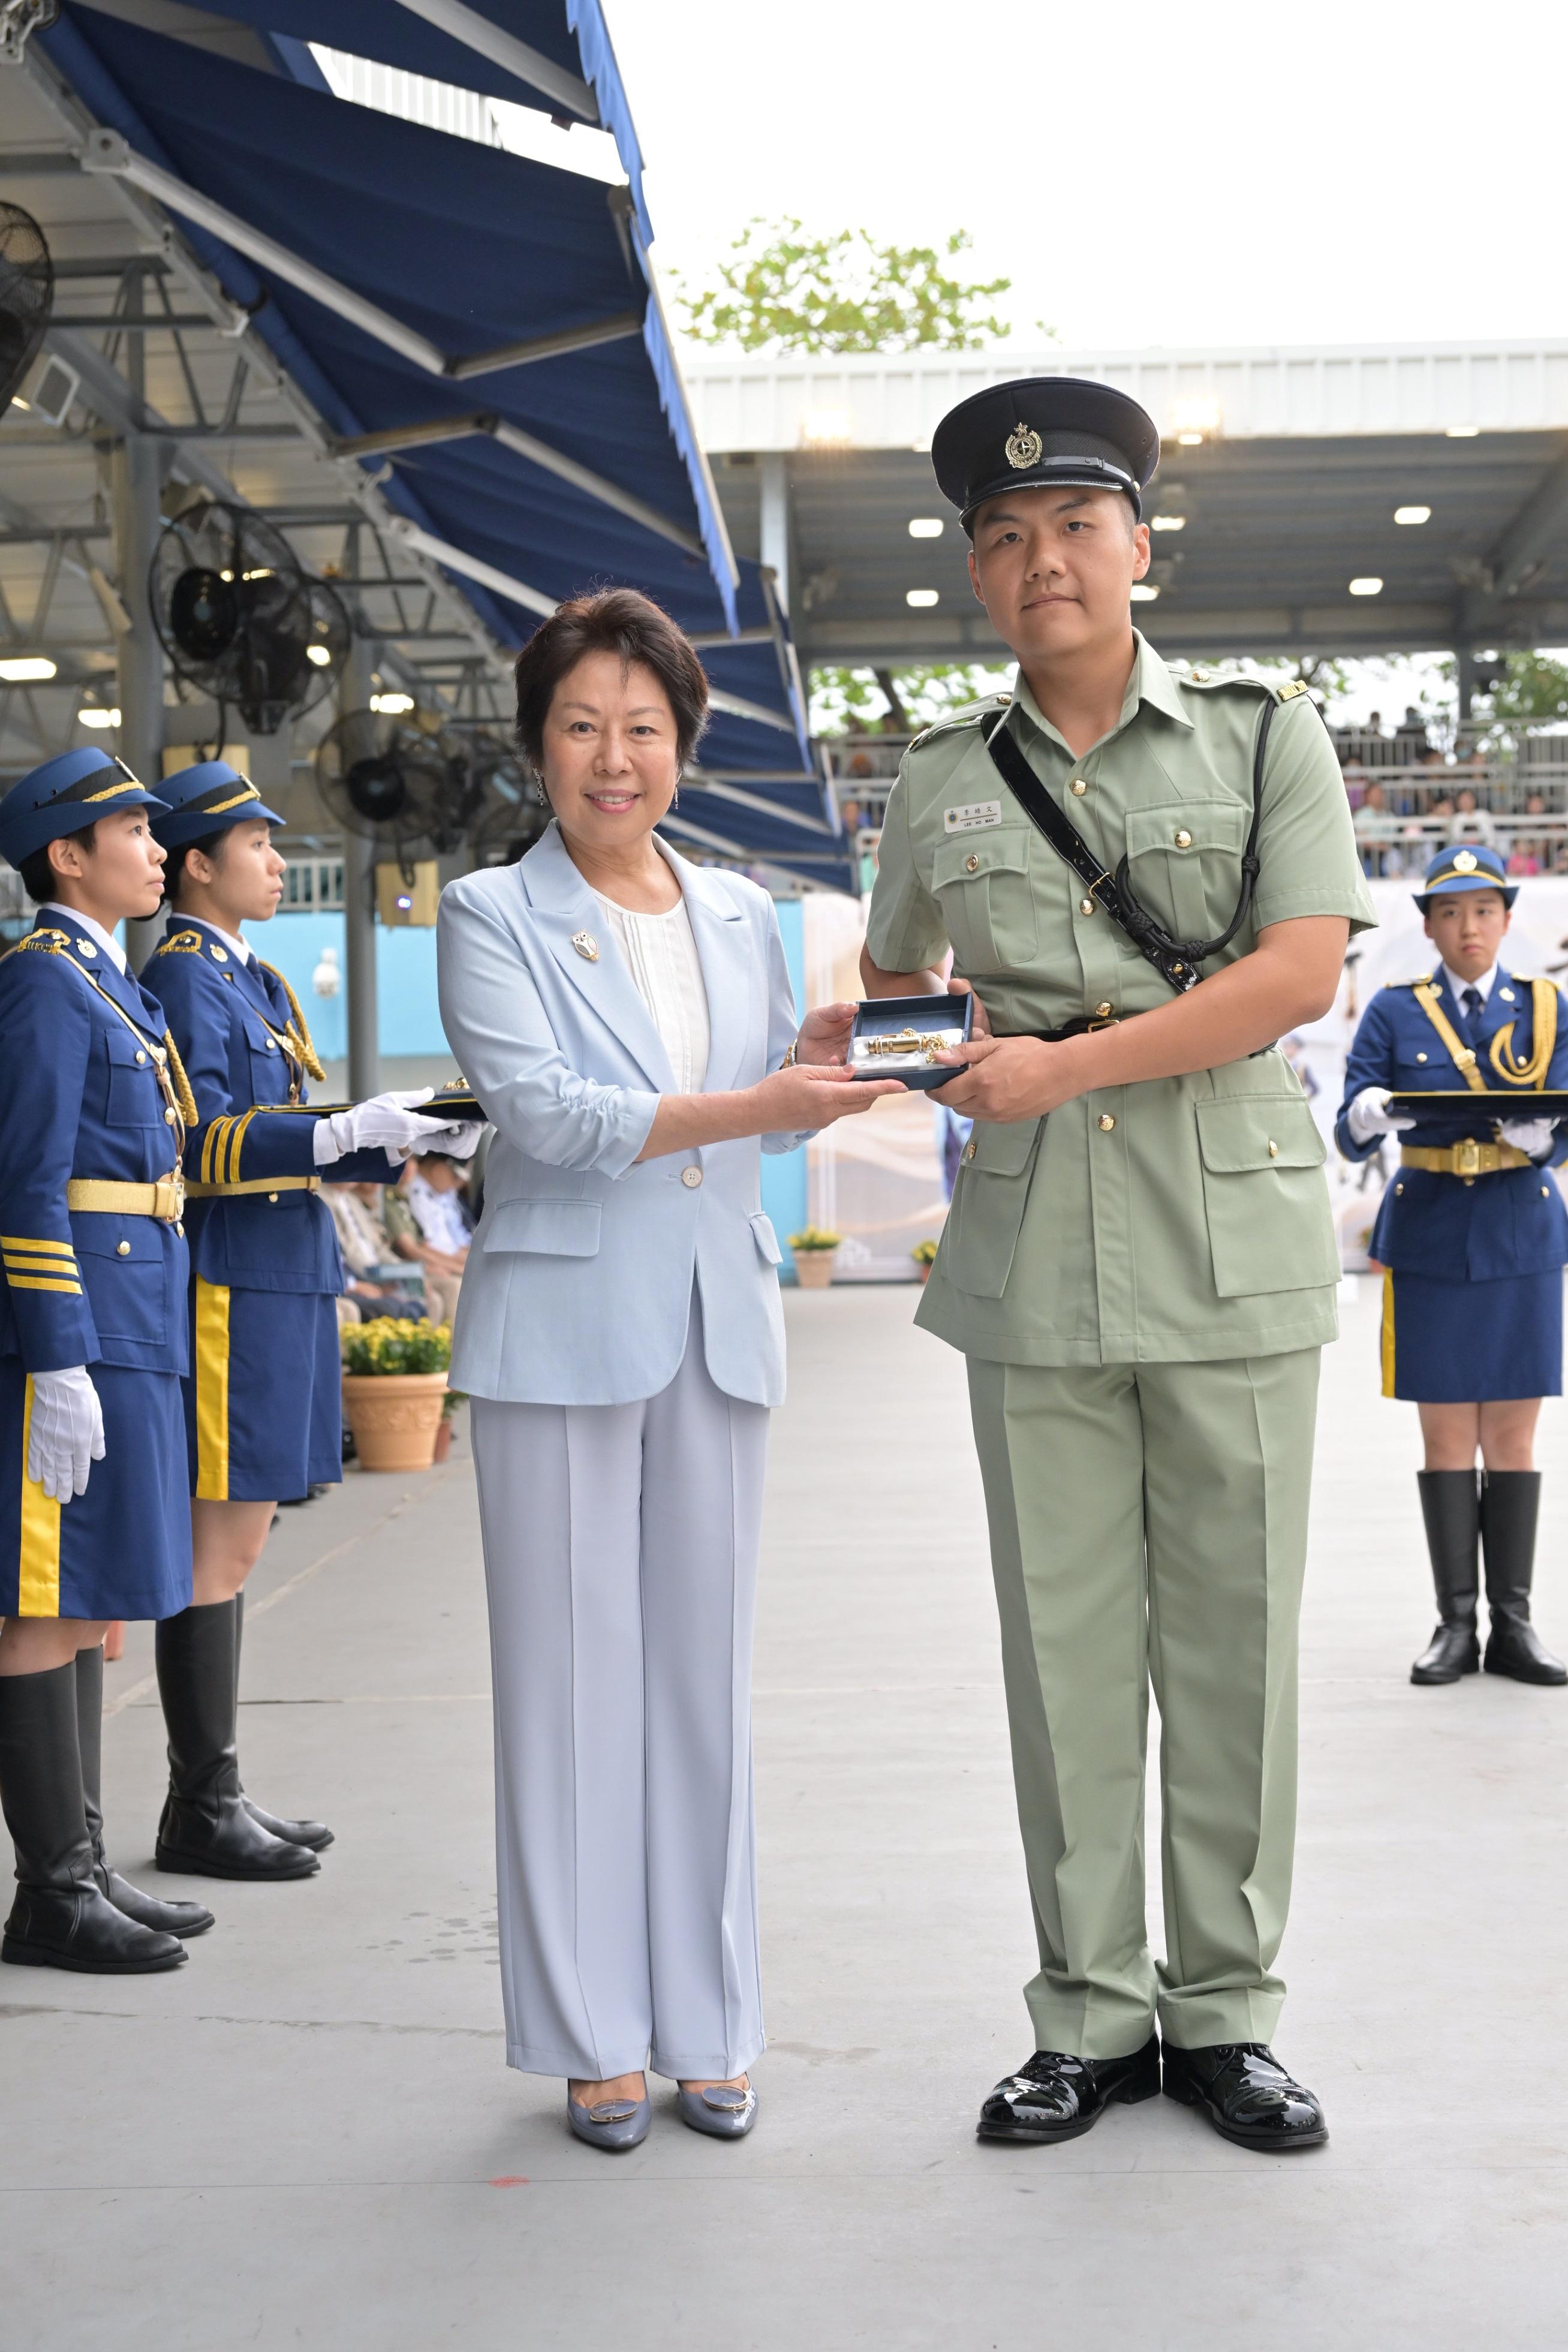 The Correctional Services Department held a passing-out parade at the Hong Kong Correctional Services Academy today (April 21). Photo shows the Chairman of the Committee on Community Support for Rehabilitated Offenders, Ms Tsui Li (left), presenting a Best Recruit Award, the Golden Whistle, to Assistant Officer II Mr Lee Ho-man.